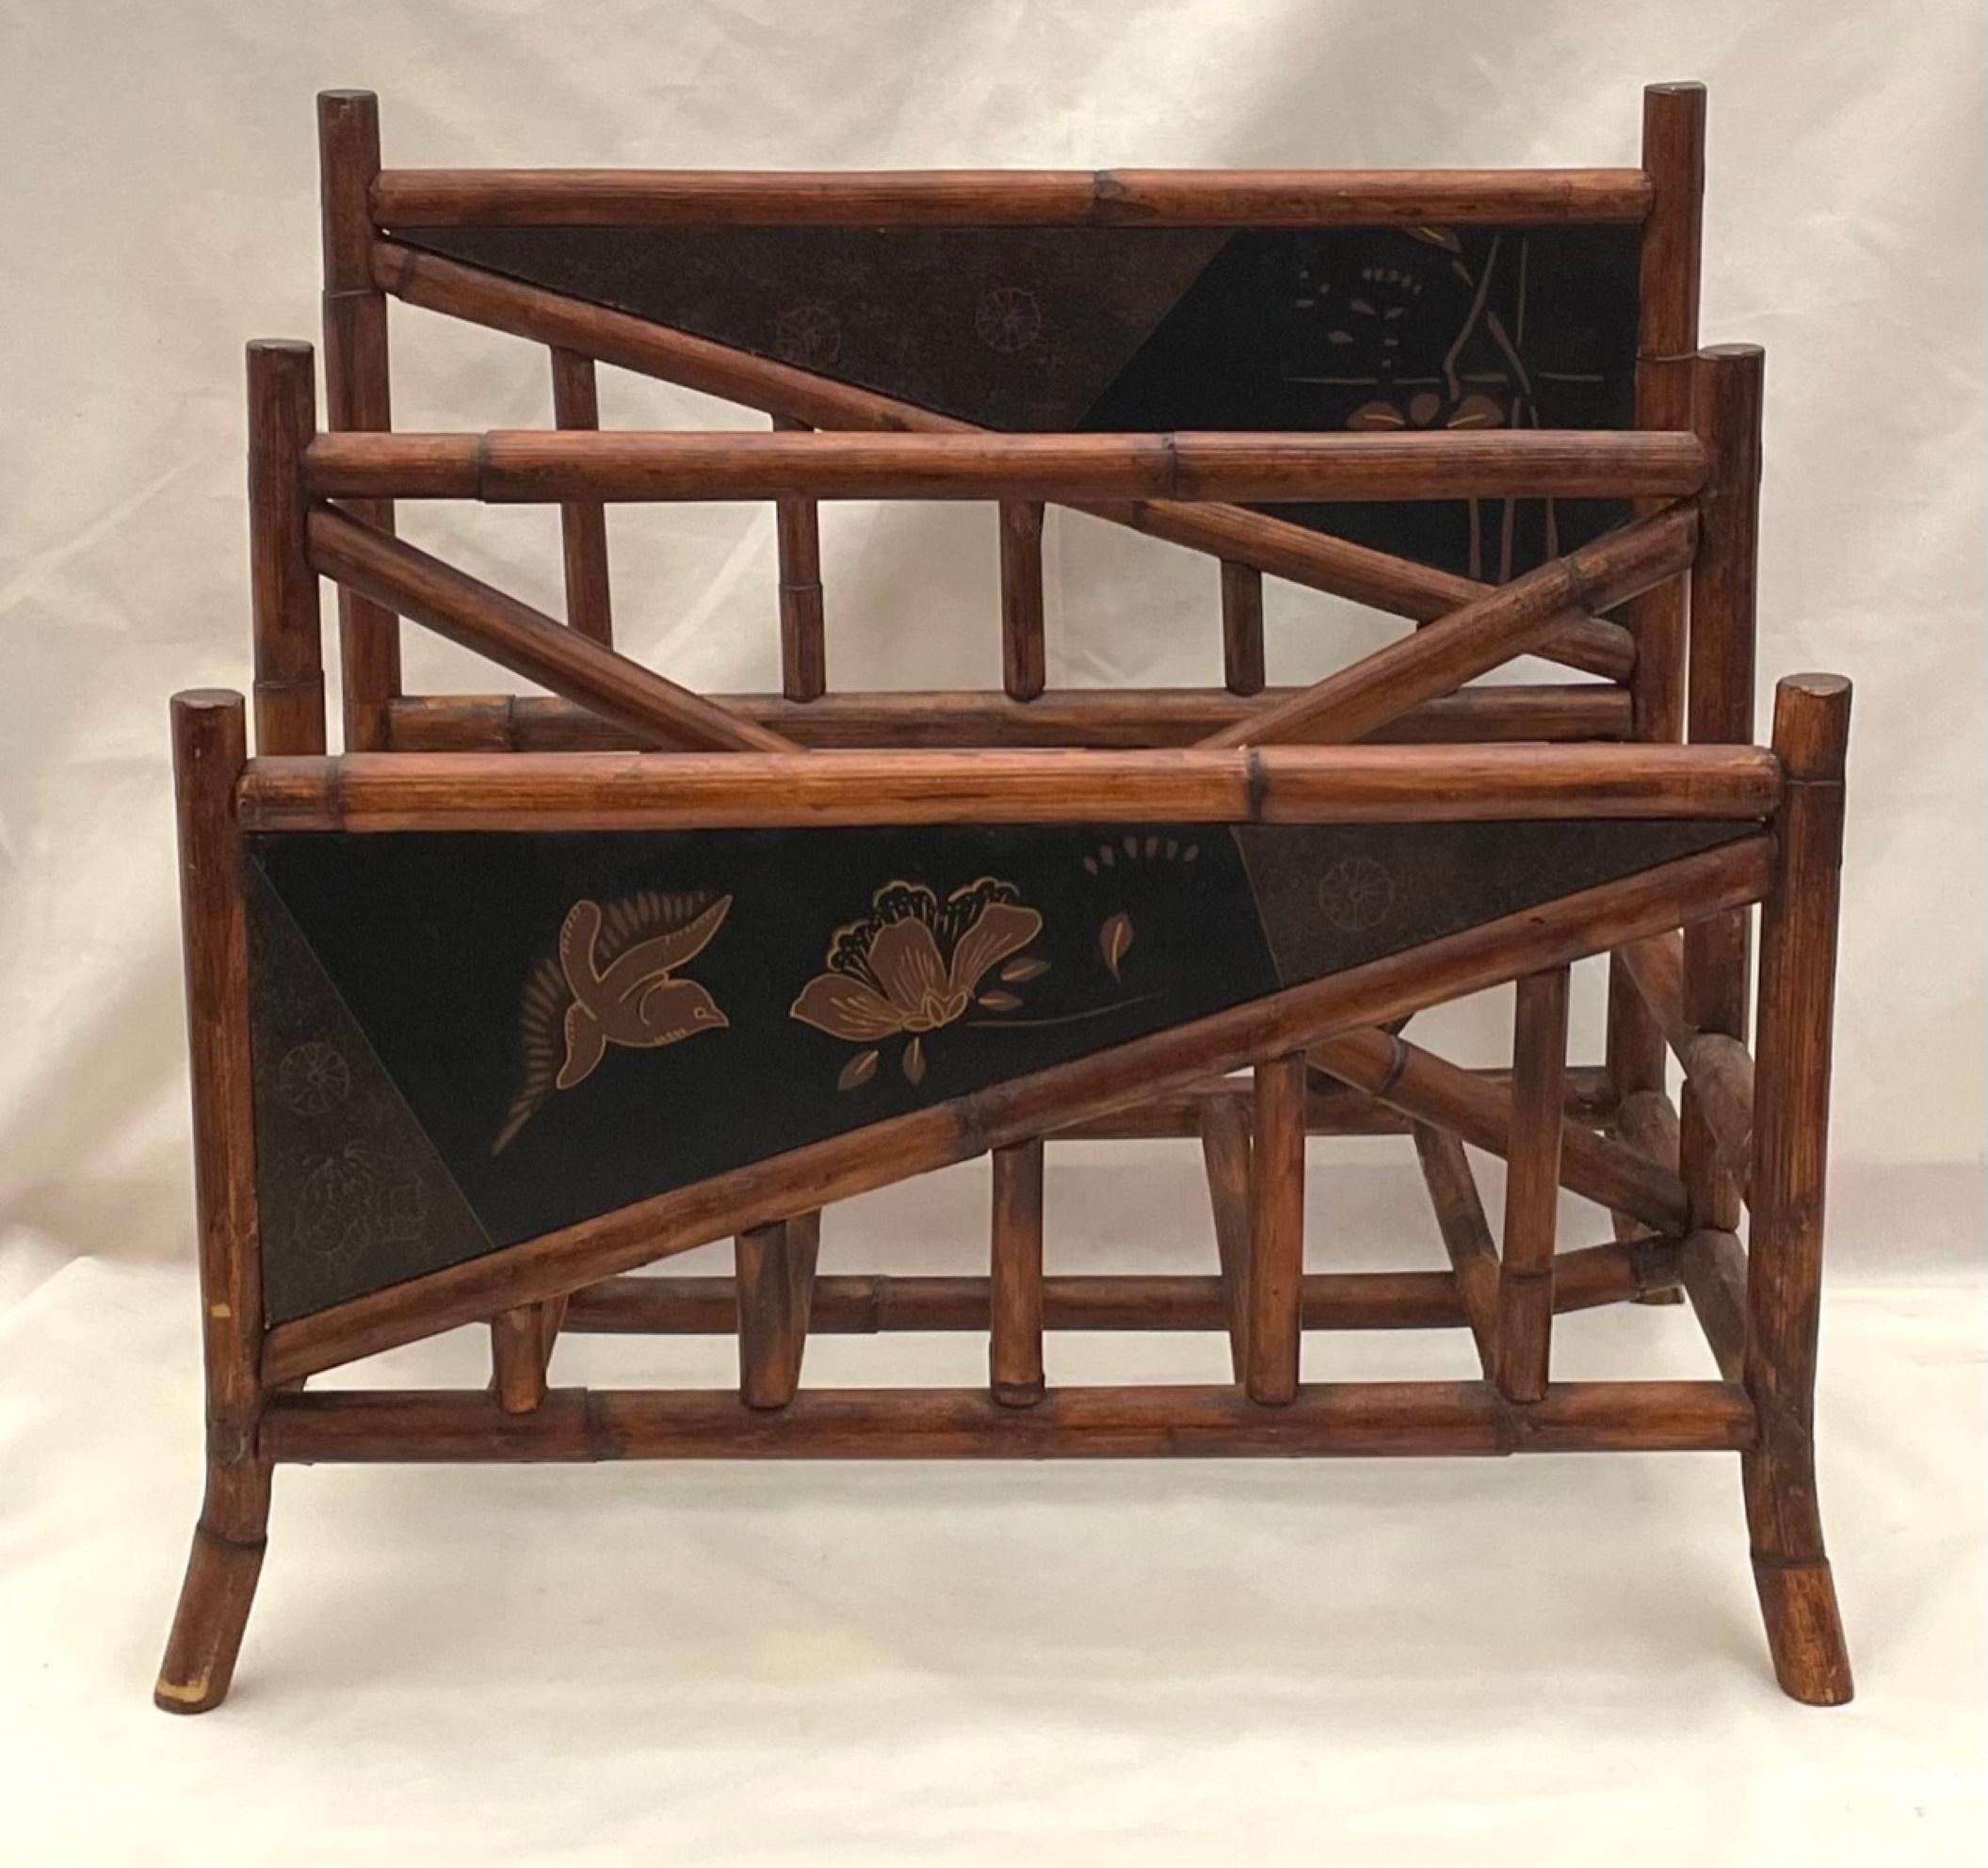 English Victorian Chinoiserie bamboo Canterbury magazine holder

English bamboo canterbury or magazine stand made in the chinoiserie revival taste of the early 20th century. An original piece with three graduated tiers create two compartments.